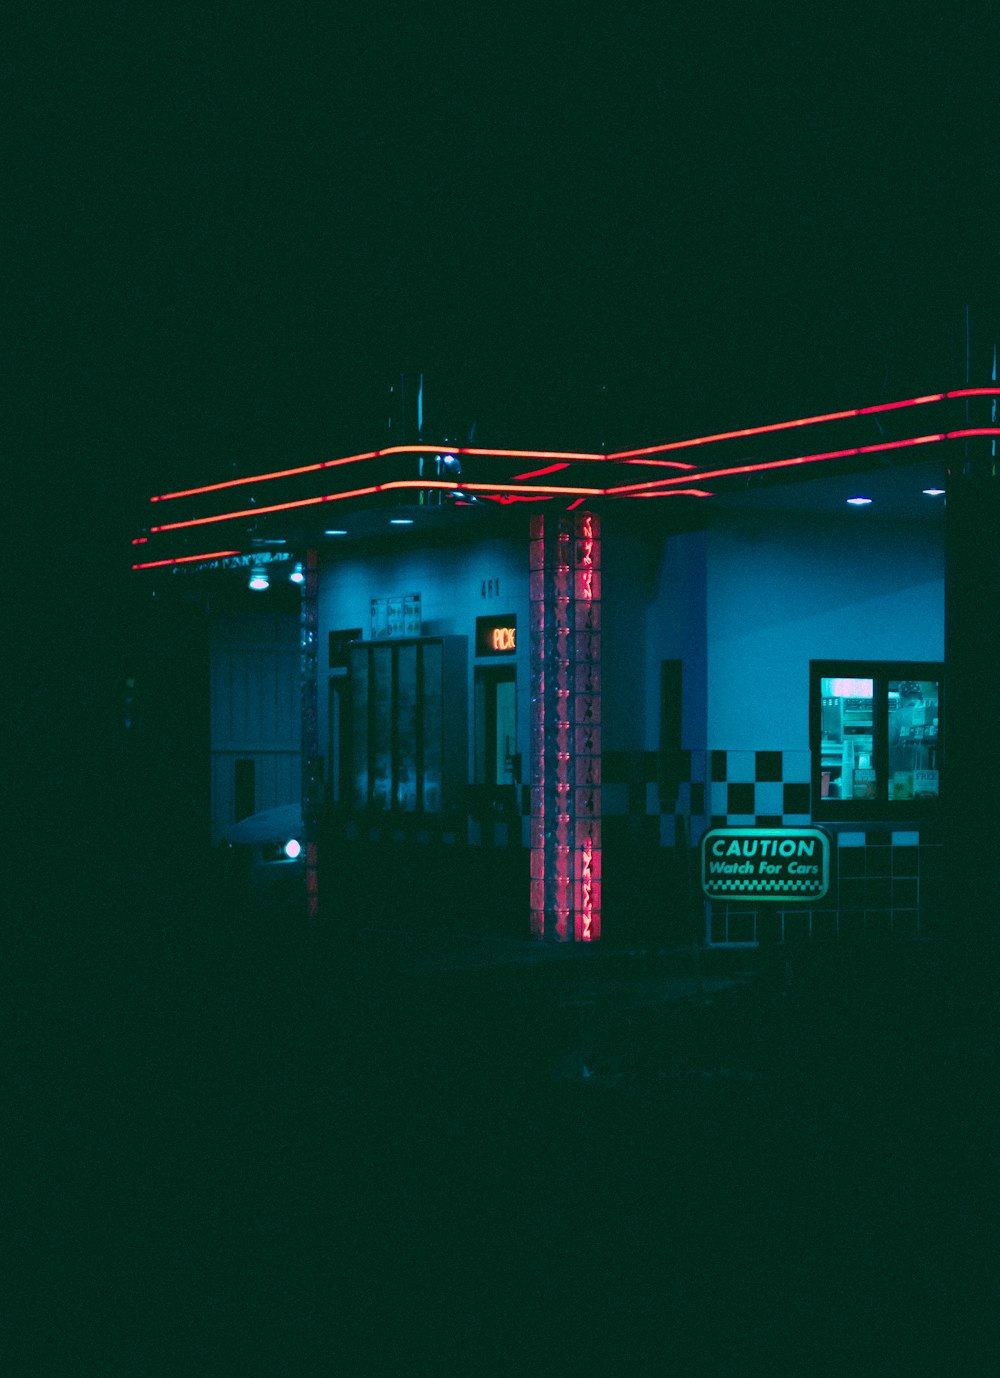 a gas station lit up at night with neon lights